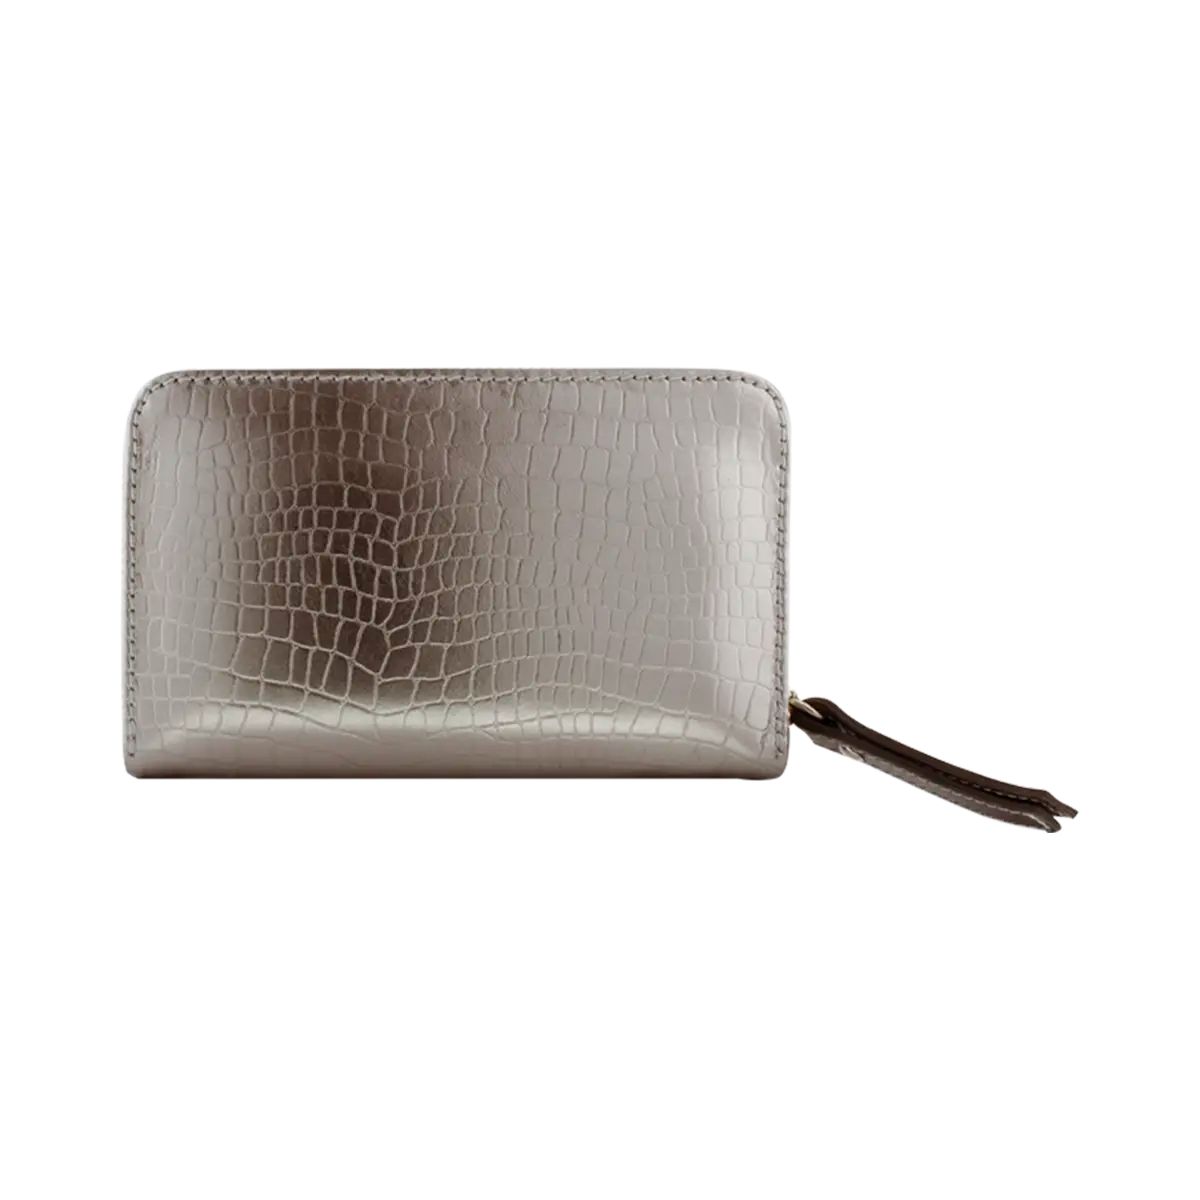 small silver print leather wallet. Fashion Accessories for women in San Diego, CA.